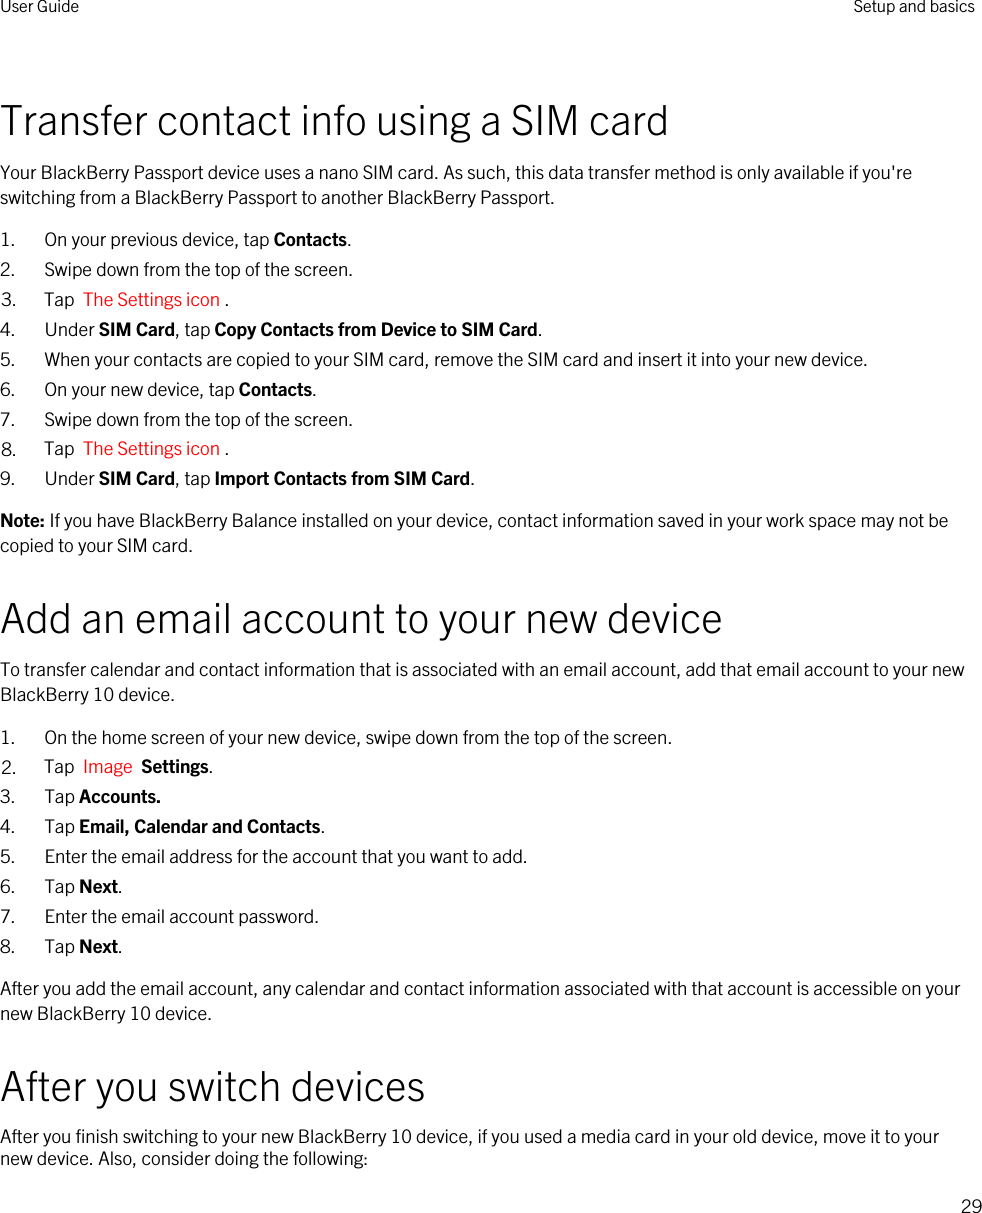 Transfer contact info using a SIM cardYour BlackBerry Passport device uses a nano SIM card. As such, this data transfer method is only available if you&apos;re switching from a BlackBerry Passport to another BlackBerry Passport.1. On your previous device, tap Contacts.2. Swipe down from the top of the screen.3. Tap  The Settings icon .4. Under SIM Card, tap Copy Contacts from Device to SIM Card.5. When your contacts are copied to your SIM card, remove the SIM card and insert it into your new device.6. On your new device, tap Contacts.7. Swipe down from the top of the screen.8. Tap  The Settings icon .9. Under SIM Card, tap Import Contacts from SIM Card.Note: If you have BlackBerry Balance installed on your device, contact information saved in your work space may not be copied to your SIM card.Add an email account to your new deviceTo transfer calendar and contact information that is associated with an email account, add that email account to your new BlackBerry 10 device.1. On the home screen of your new device, swipe down from the top of the screen.2. Tap  Image  Settings.3. Tap Accounts.4. Tap Email, Calendar and Contacts.5. Enter the email address for the account that you want to add.6. Tap Next.7. Enter the email account password.8. Tap Next.After you add the email account, any calendar and contact information associated with that account is accessible on your new BlackBerry 10 device.After you switch devicesAfter you finish switching to your new BlackBerry 10 device, if you used a media card in your old device, move it to your new device. Also, consider doing the following:User Guide Setup and basics29